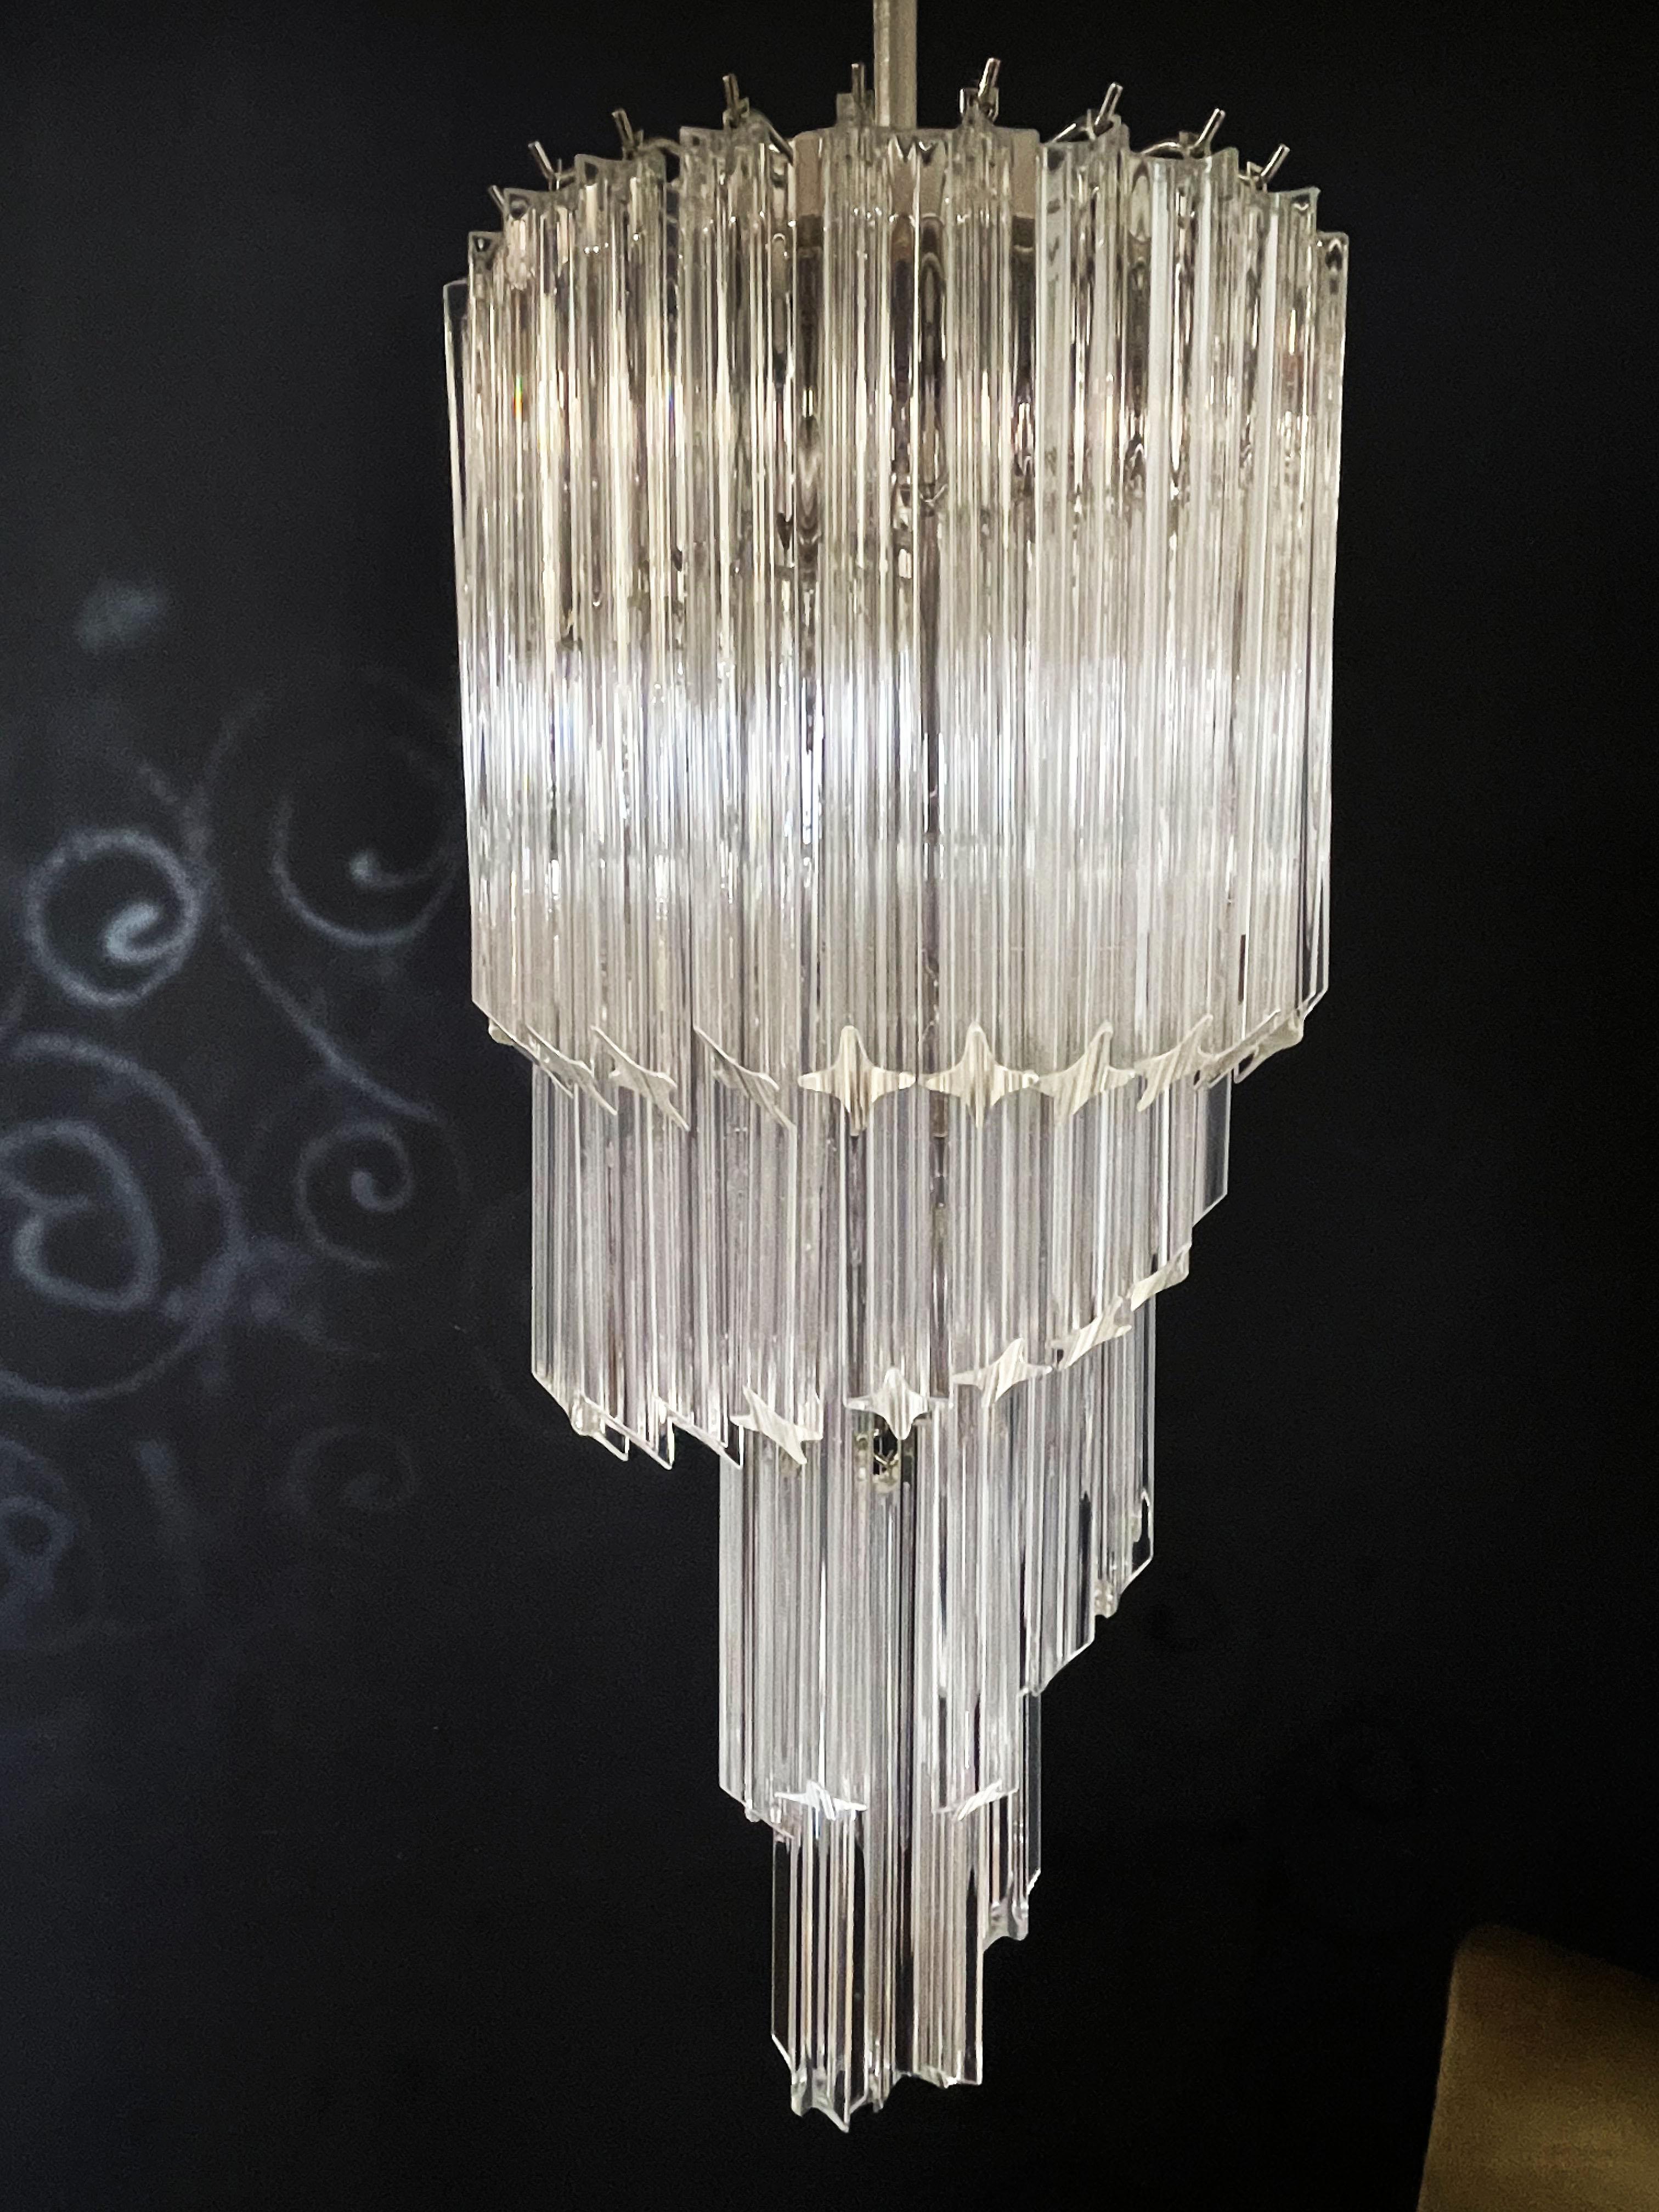 Fantastic and big Murano chandelier made by 54 Murano crystal prism (quadriedri) in a chrome metal frame. The shape of this chandelier is spiral.
Period: 1980s-1990s
Dimensions: 63 inches height (160 cm) with chain, 35.45 inches height (90 cm)